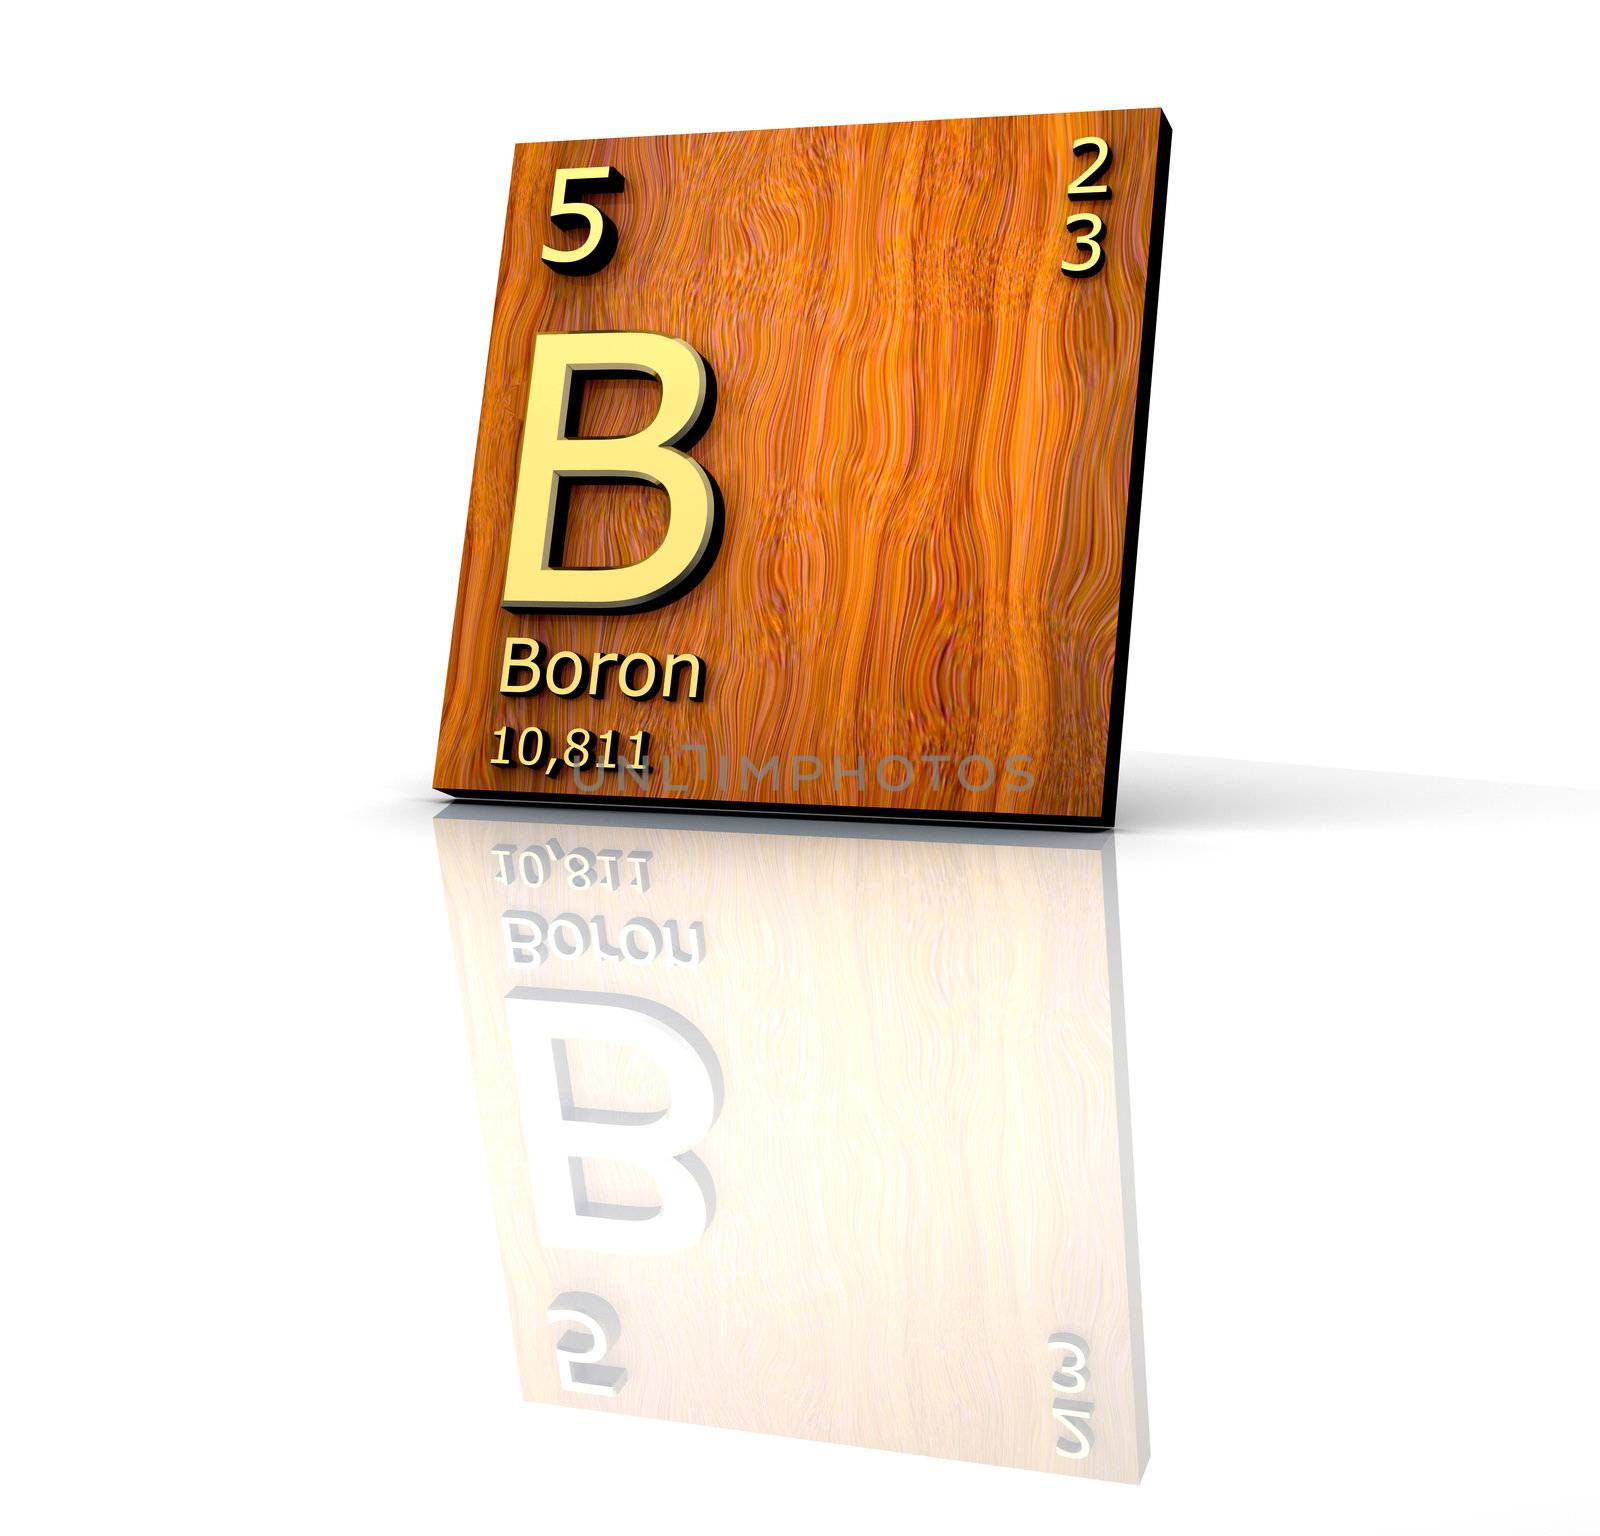 Boron from Periodic Table of Elements - wood board 